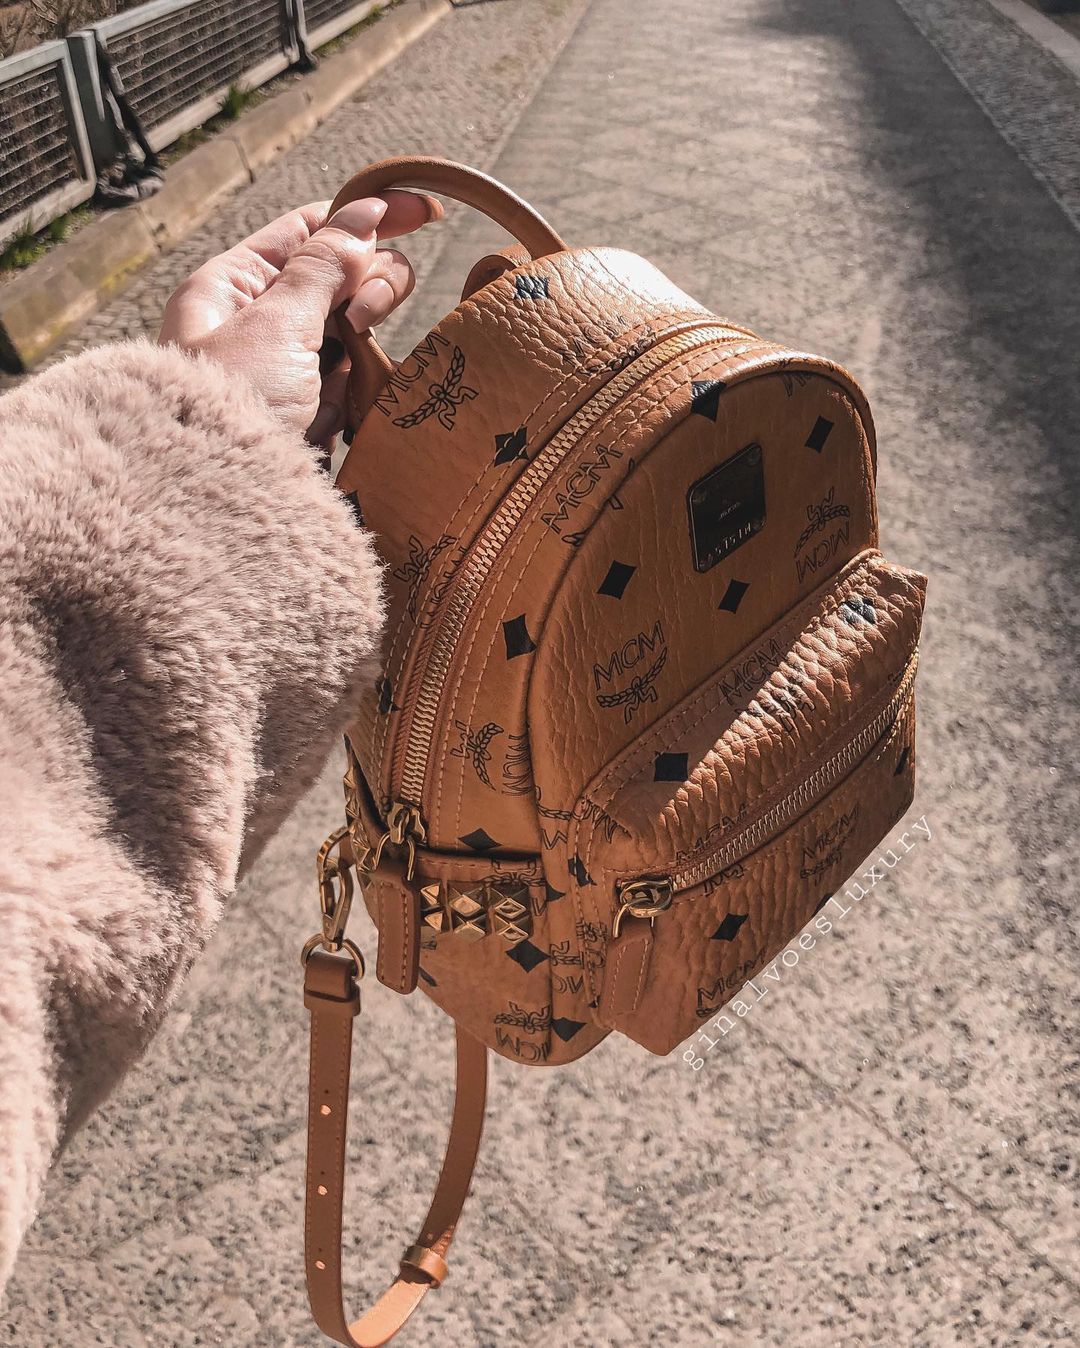 216 Serious Handbag Inspo Every Accessory Obsessed Girl Must See ...